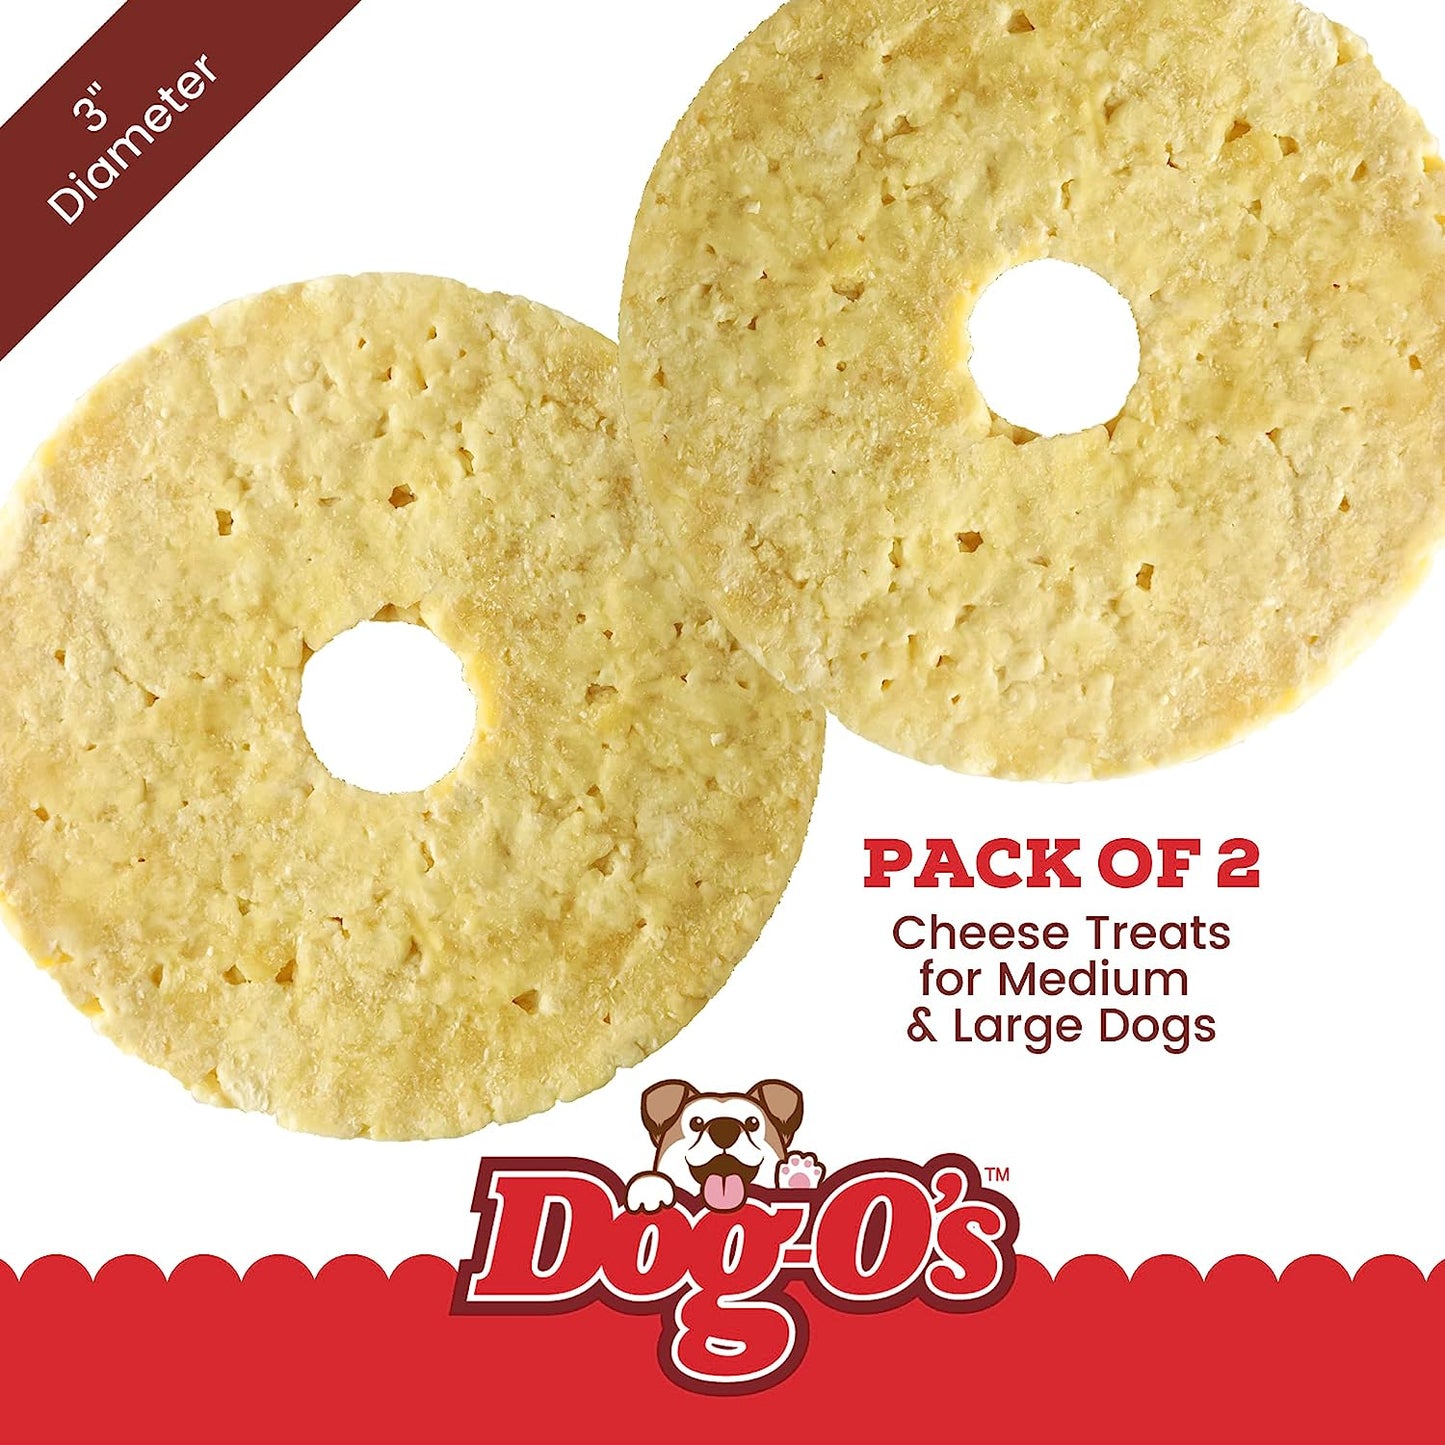 DOGOS CHEESE CHOMPERS LG